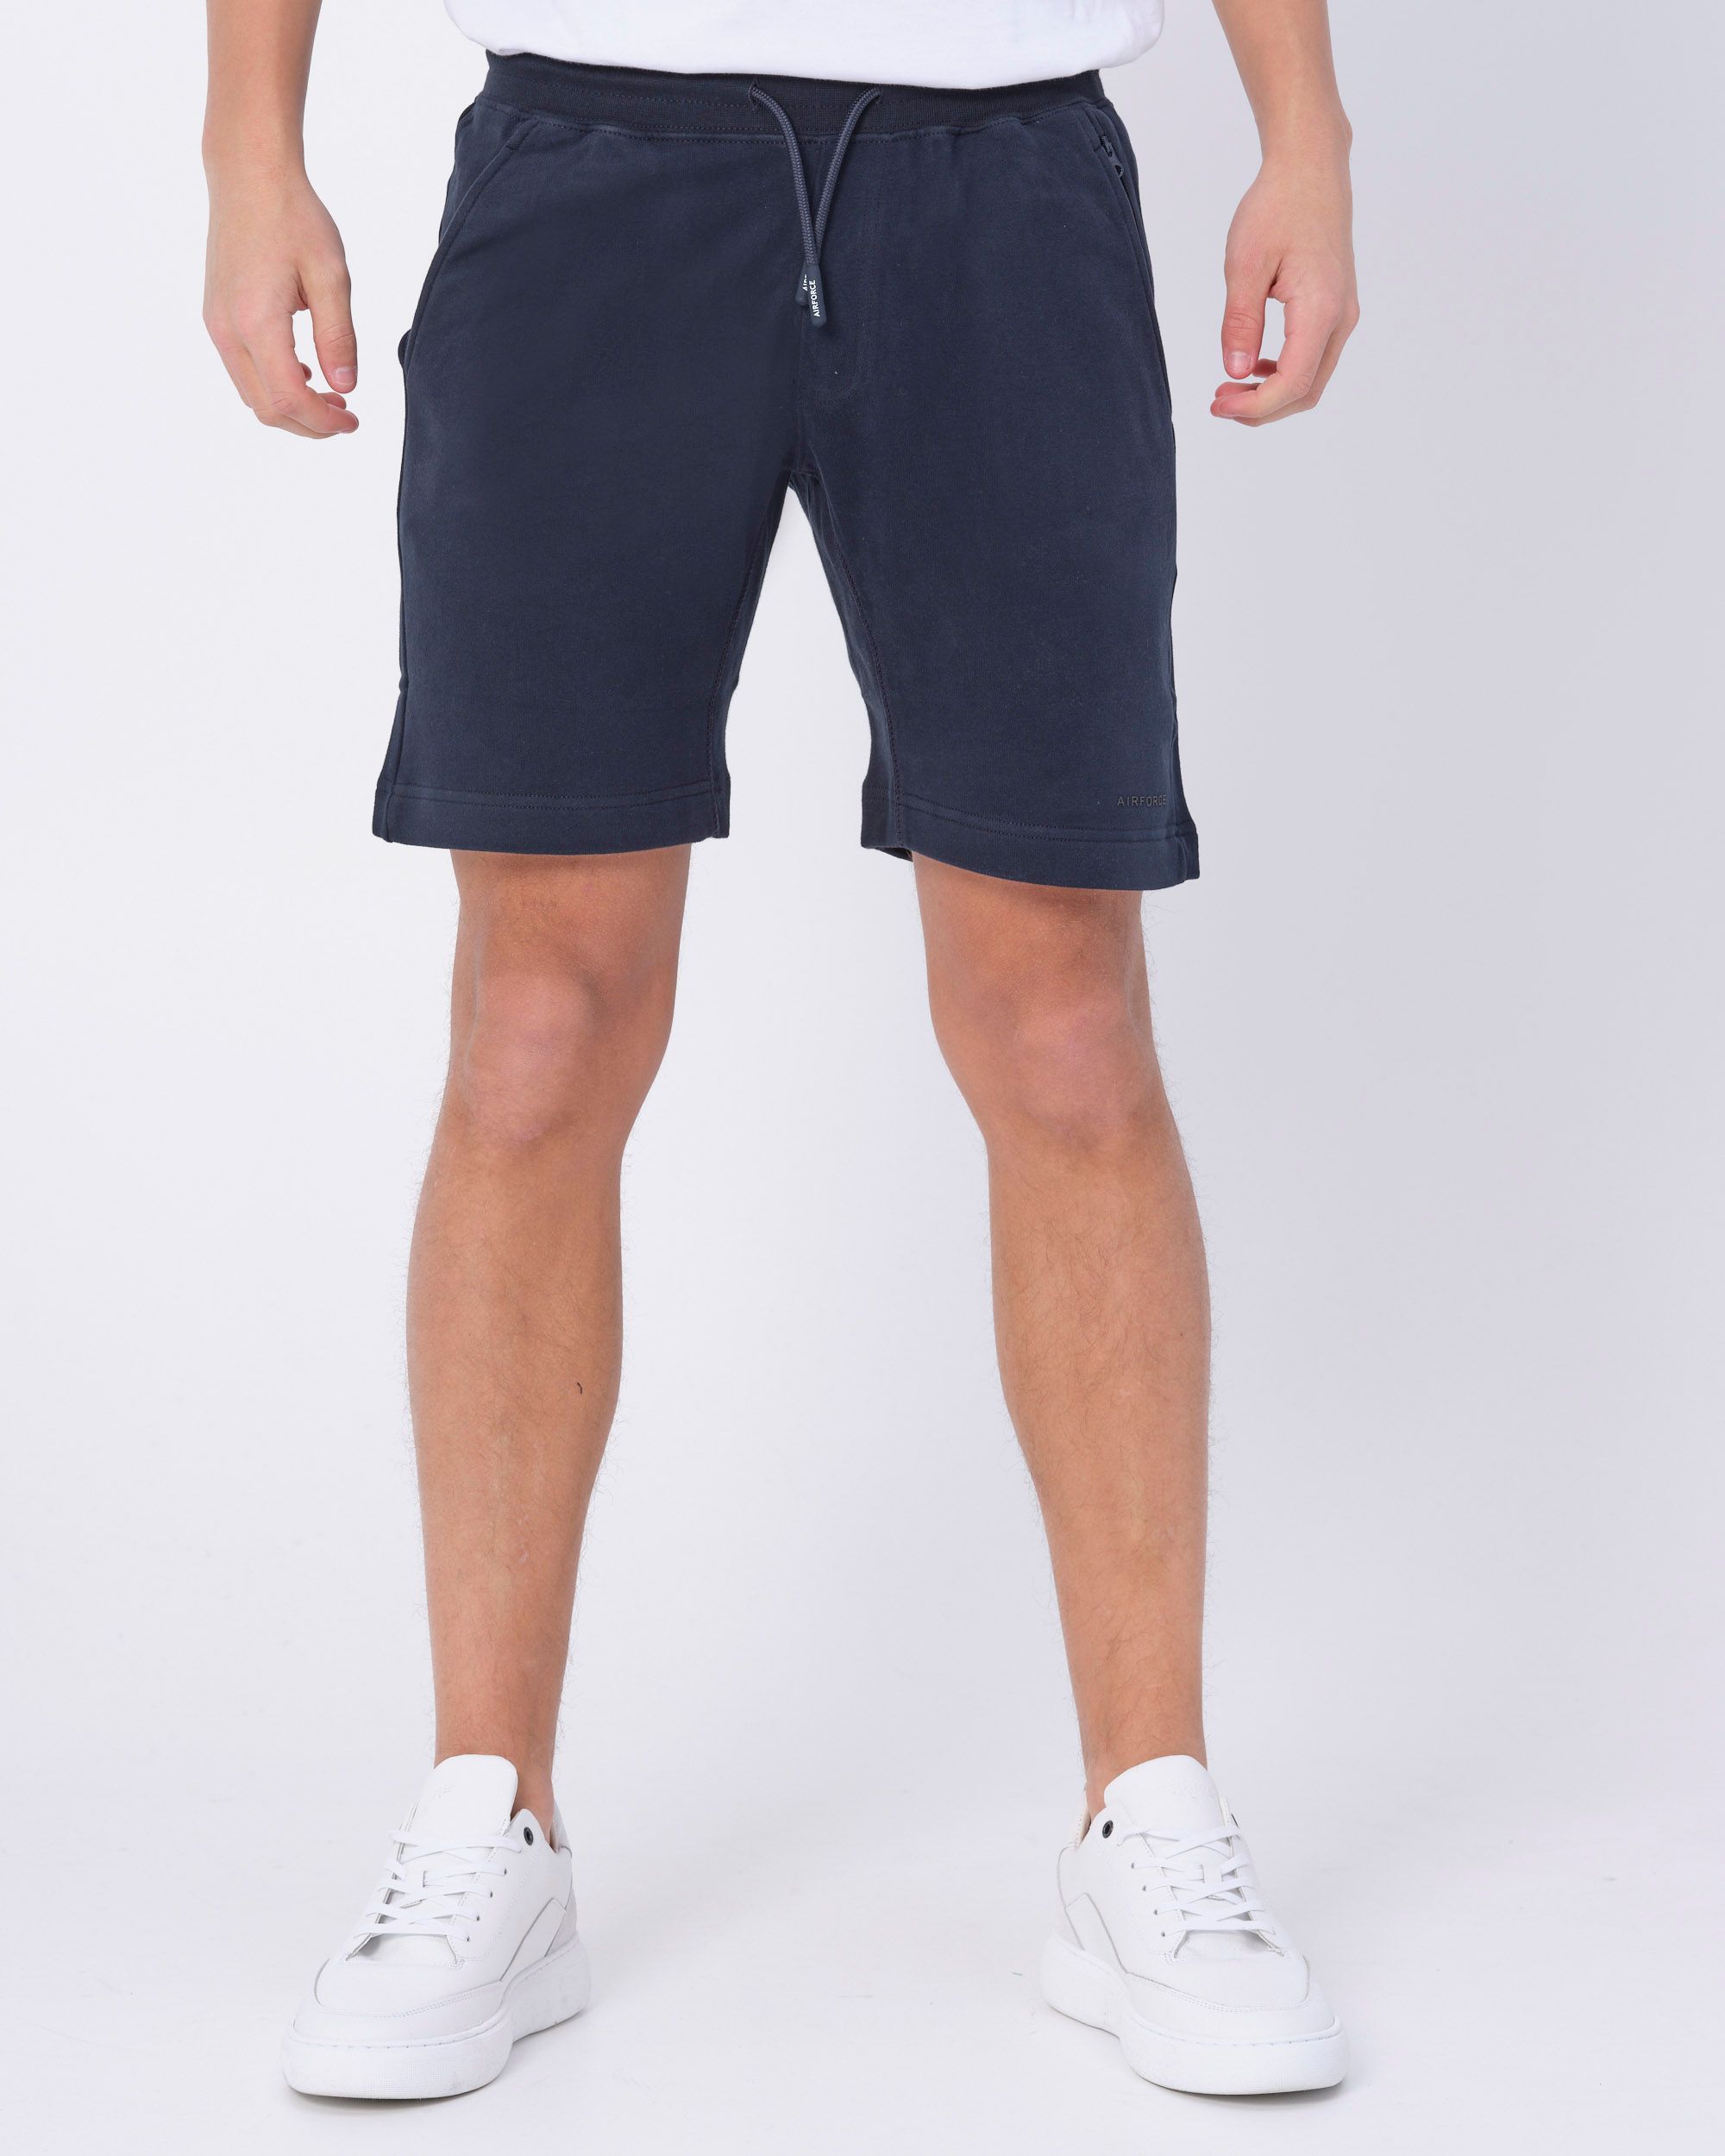 Airforce Jogg Short Donker blauw 083274-001-L